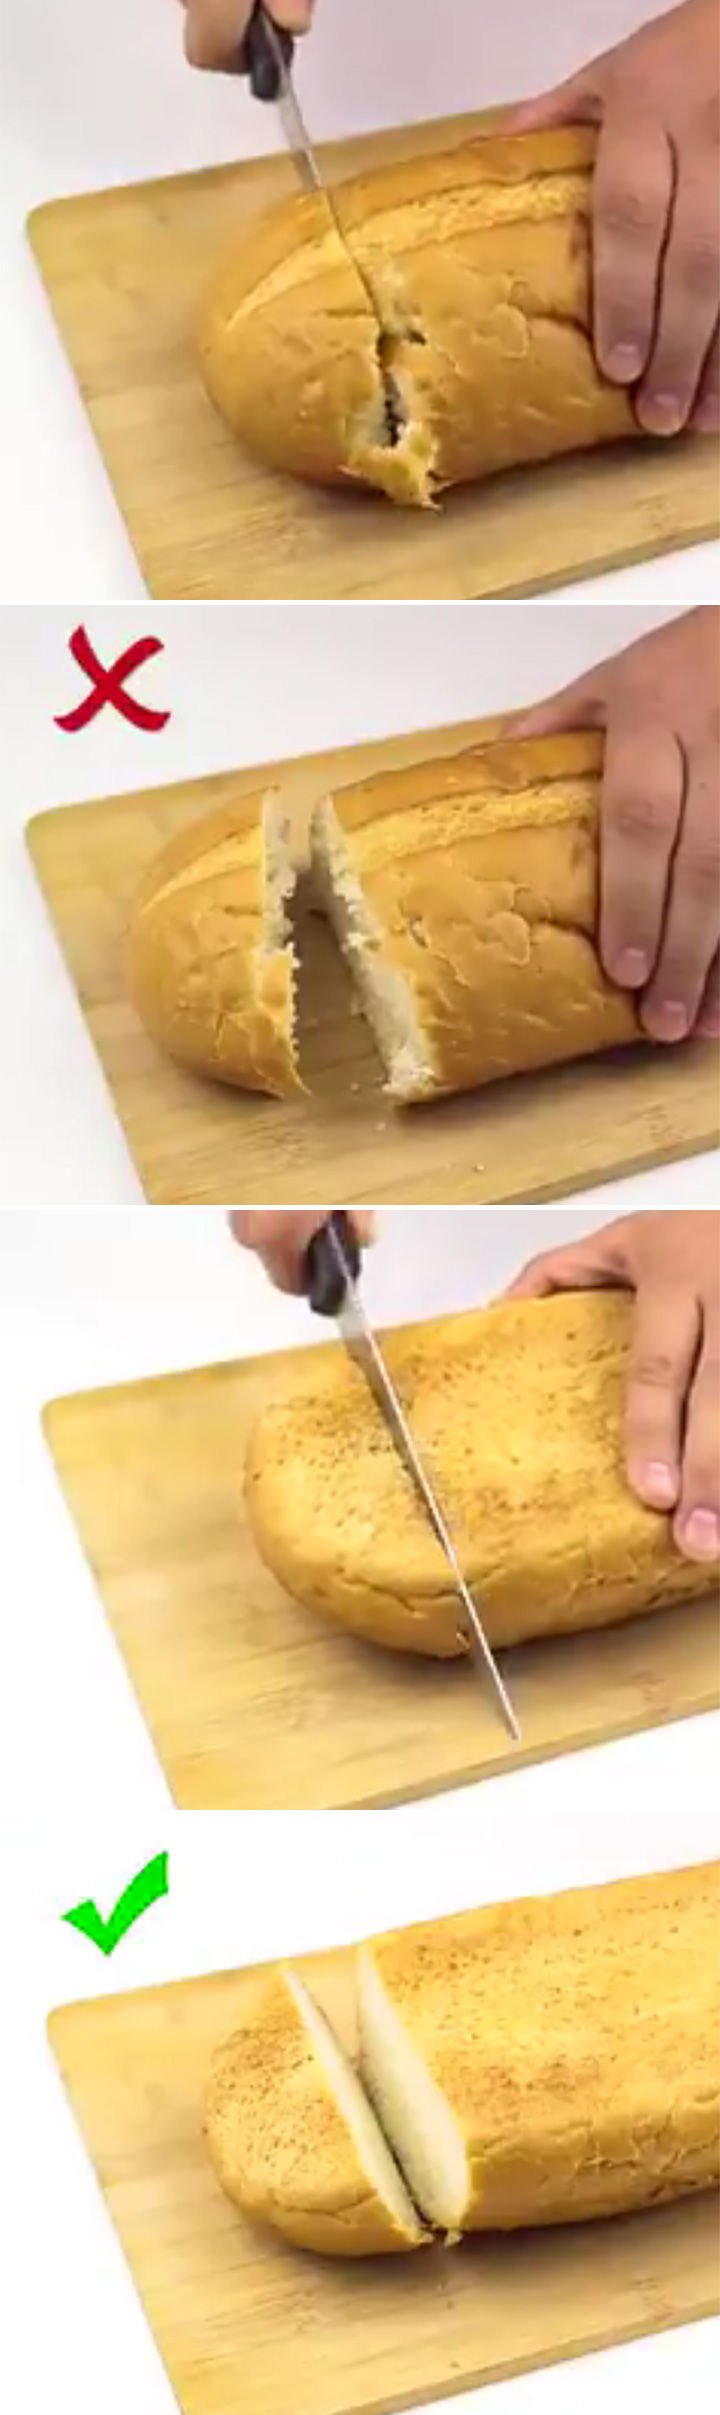 21 Everyday Life Hacks - Slice your bread upside down to prevent ripping the crust.